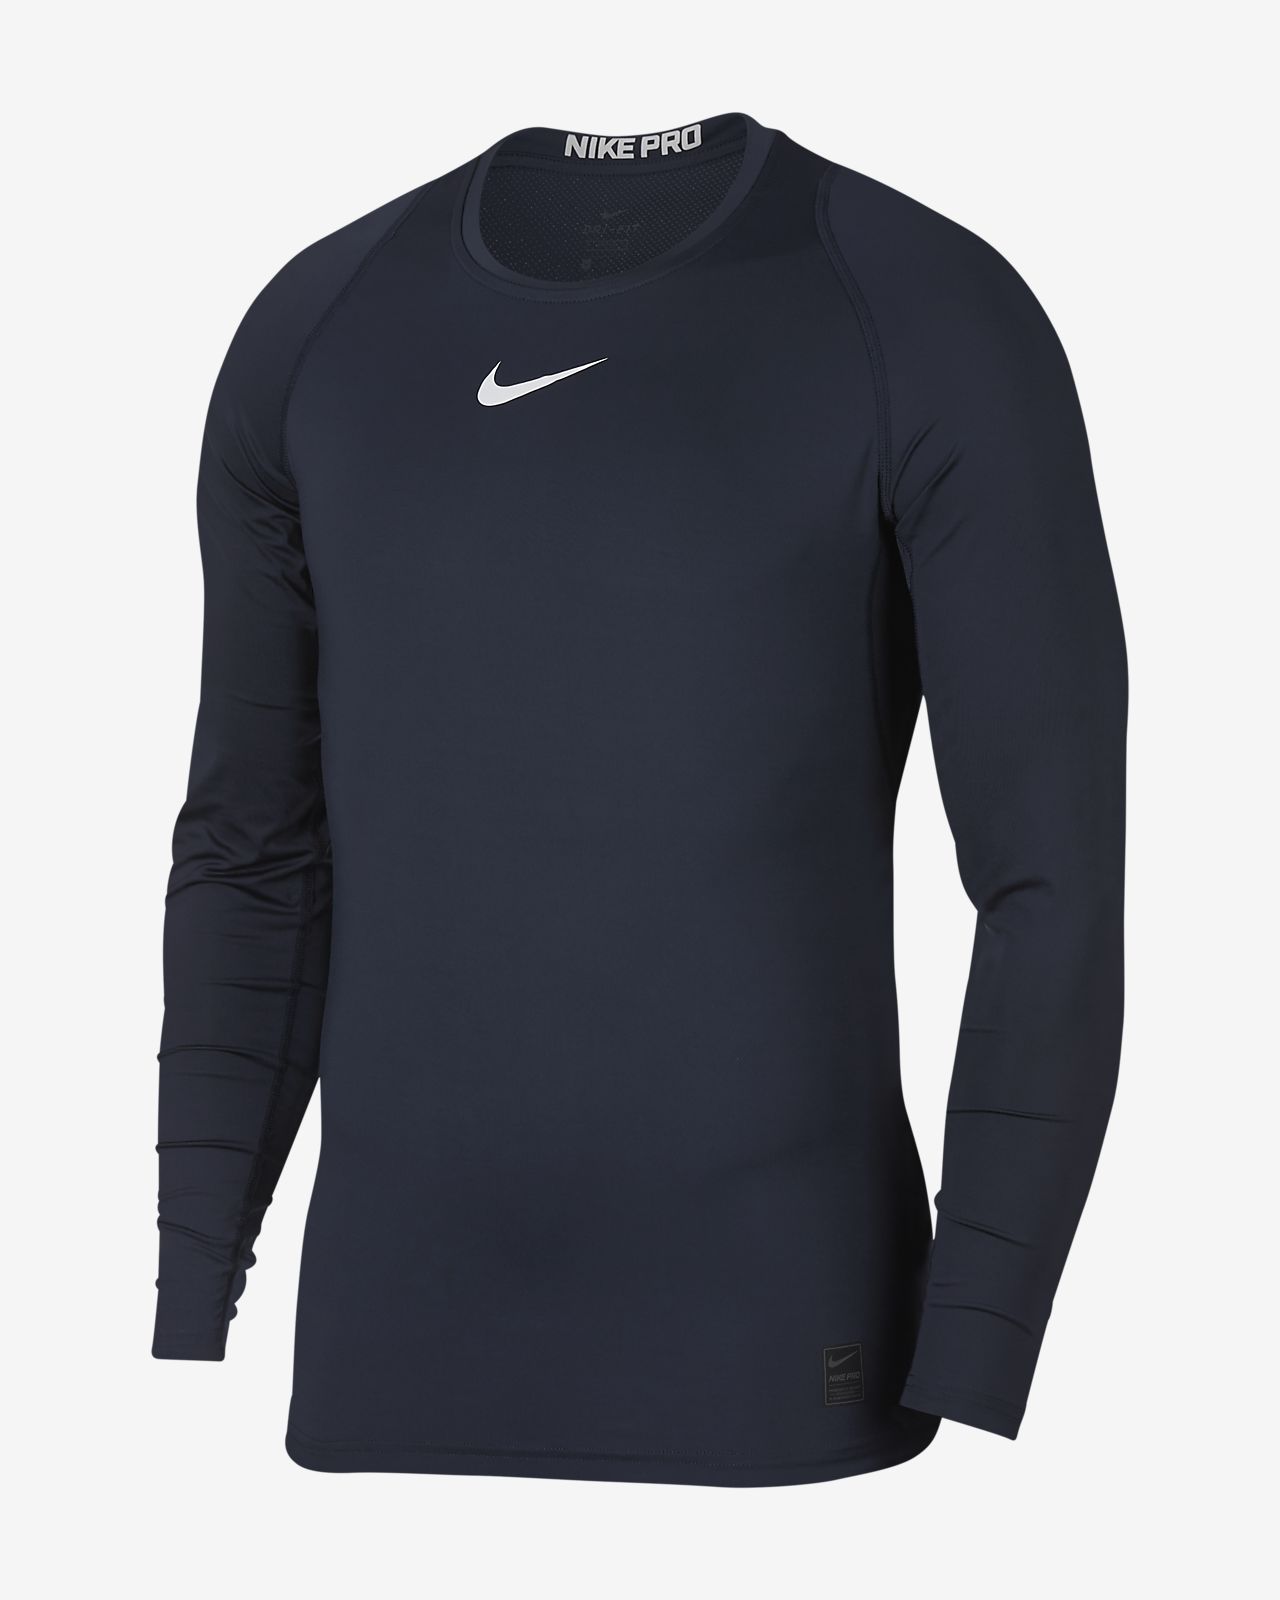 Nike Pro Top Men S Fitted Long Sleeve Top